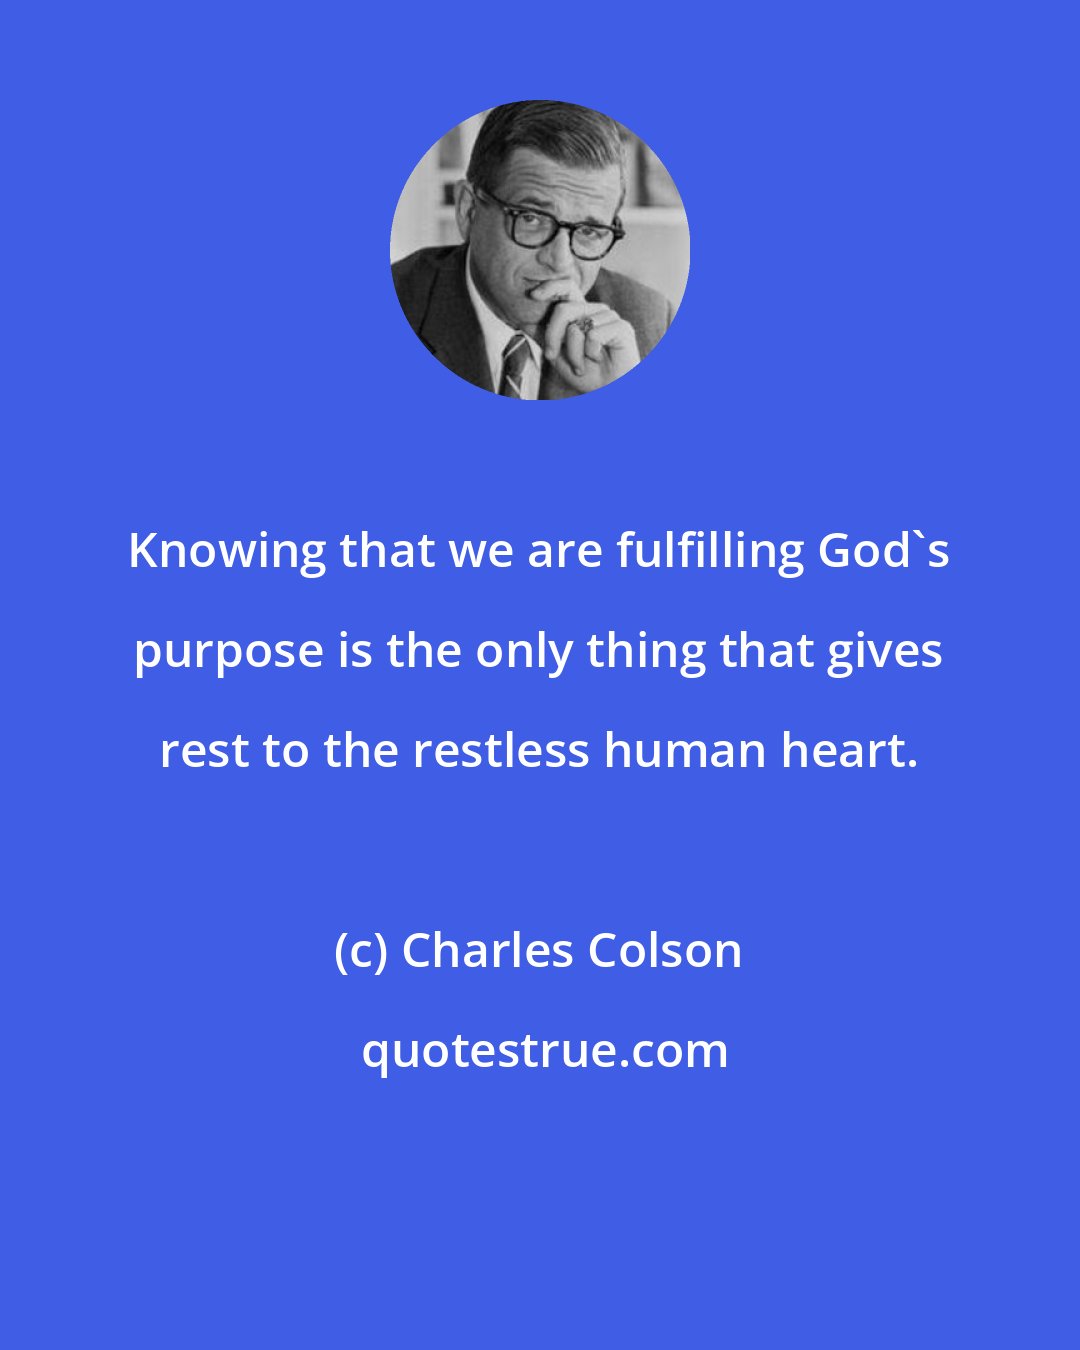 Charles Colson: Knowing that we are fulfilling God's purpose is the only thing that gives rest to the restless human heart.